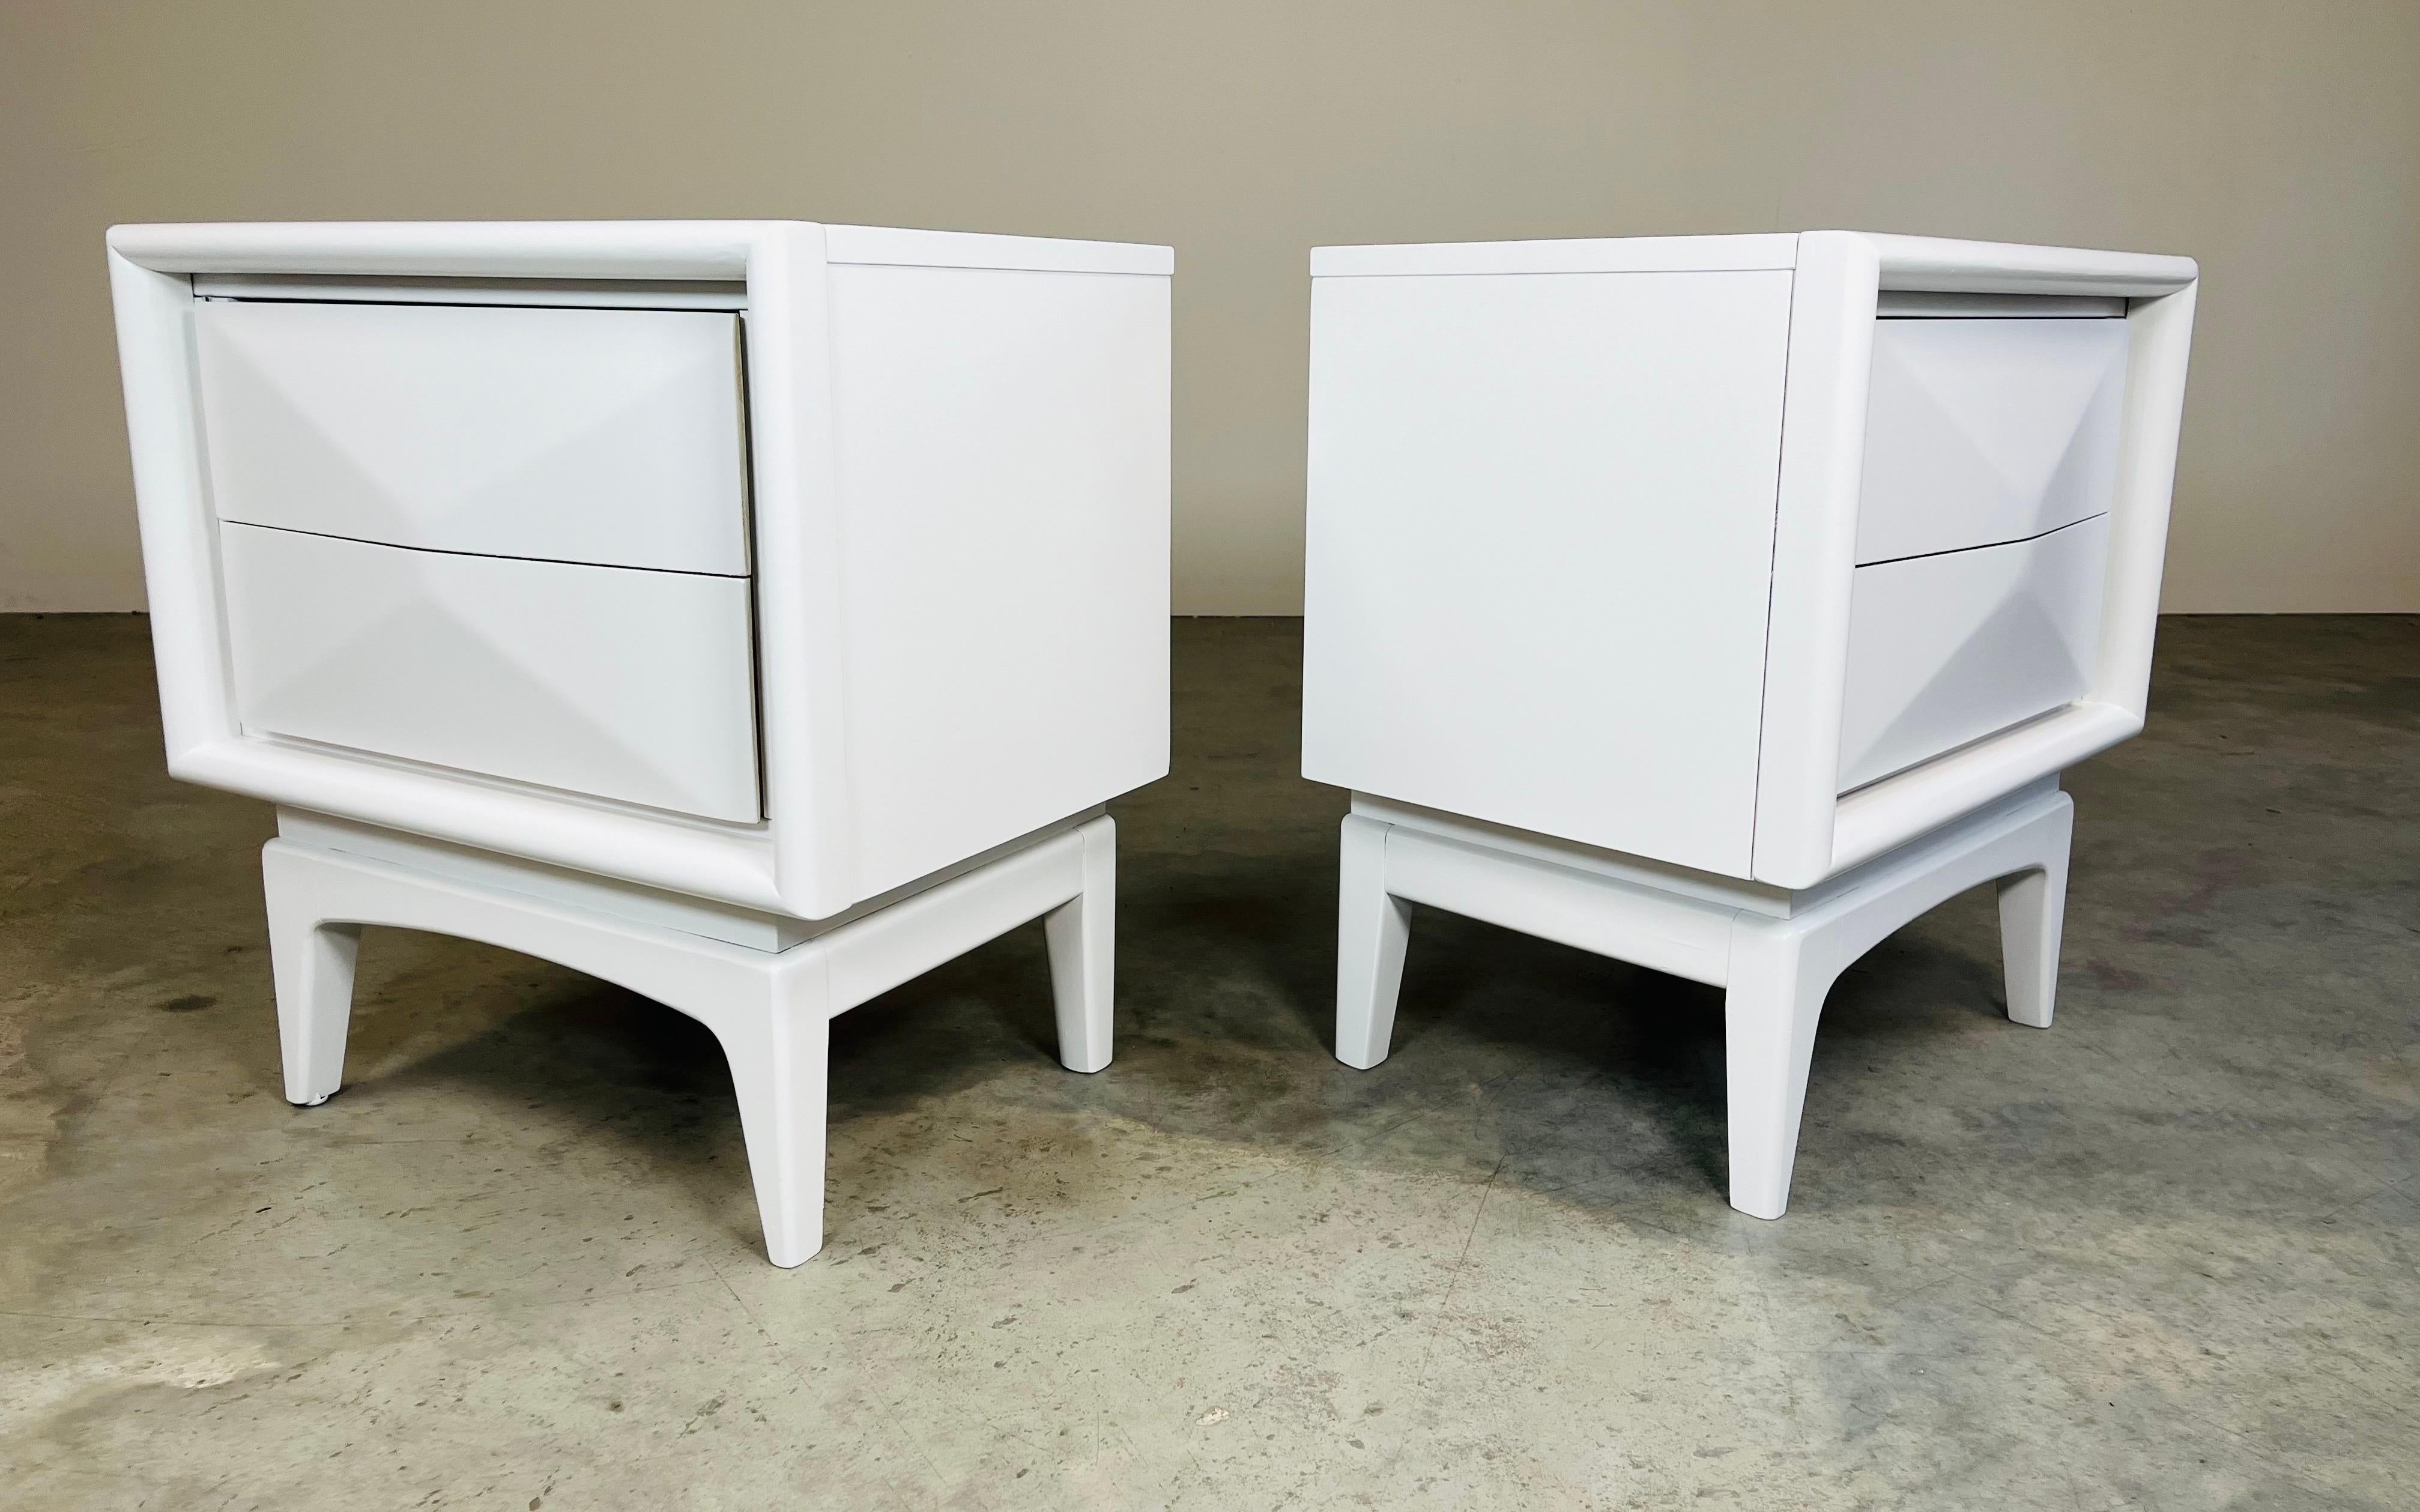 20th Century Mid-Century White Diamond Front Nightstands By United Furniture  For Sale